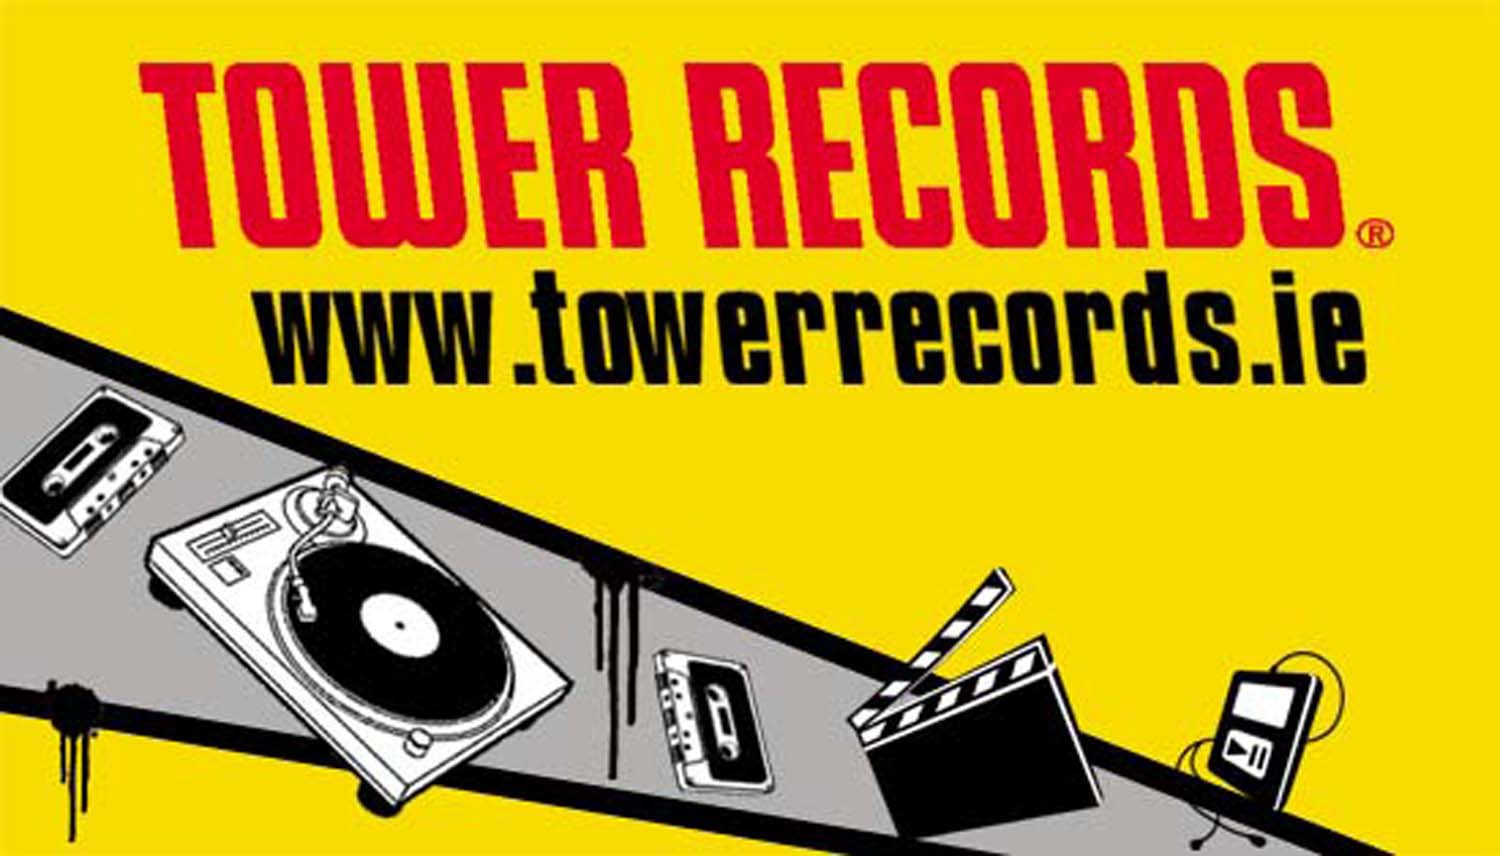 Noise Annoys: NEW SPONSOR - TOWER RECORDS